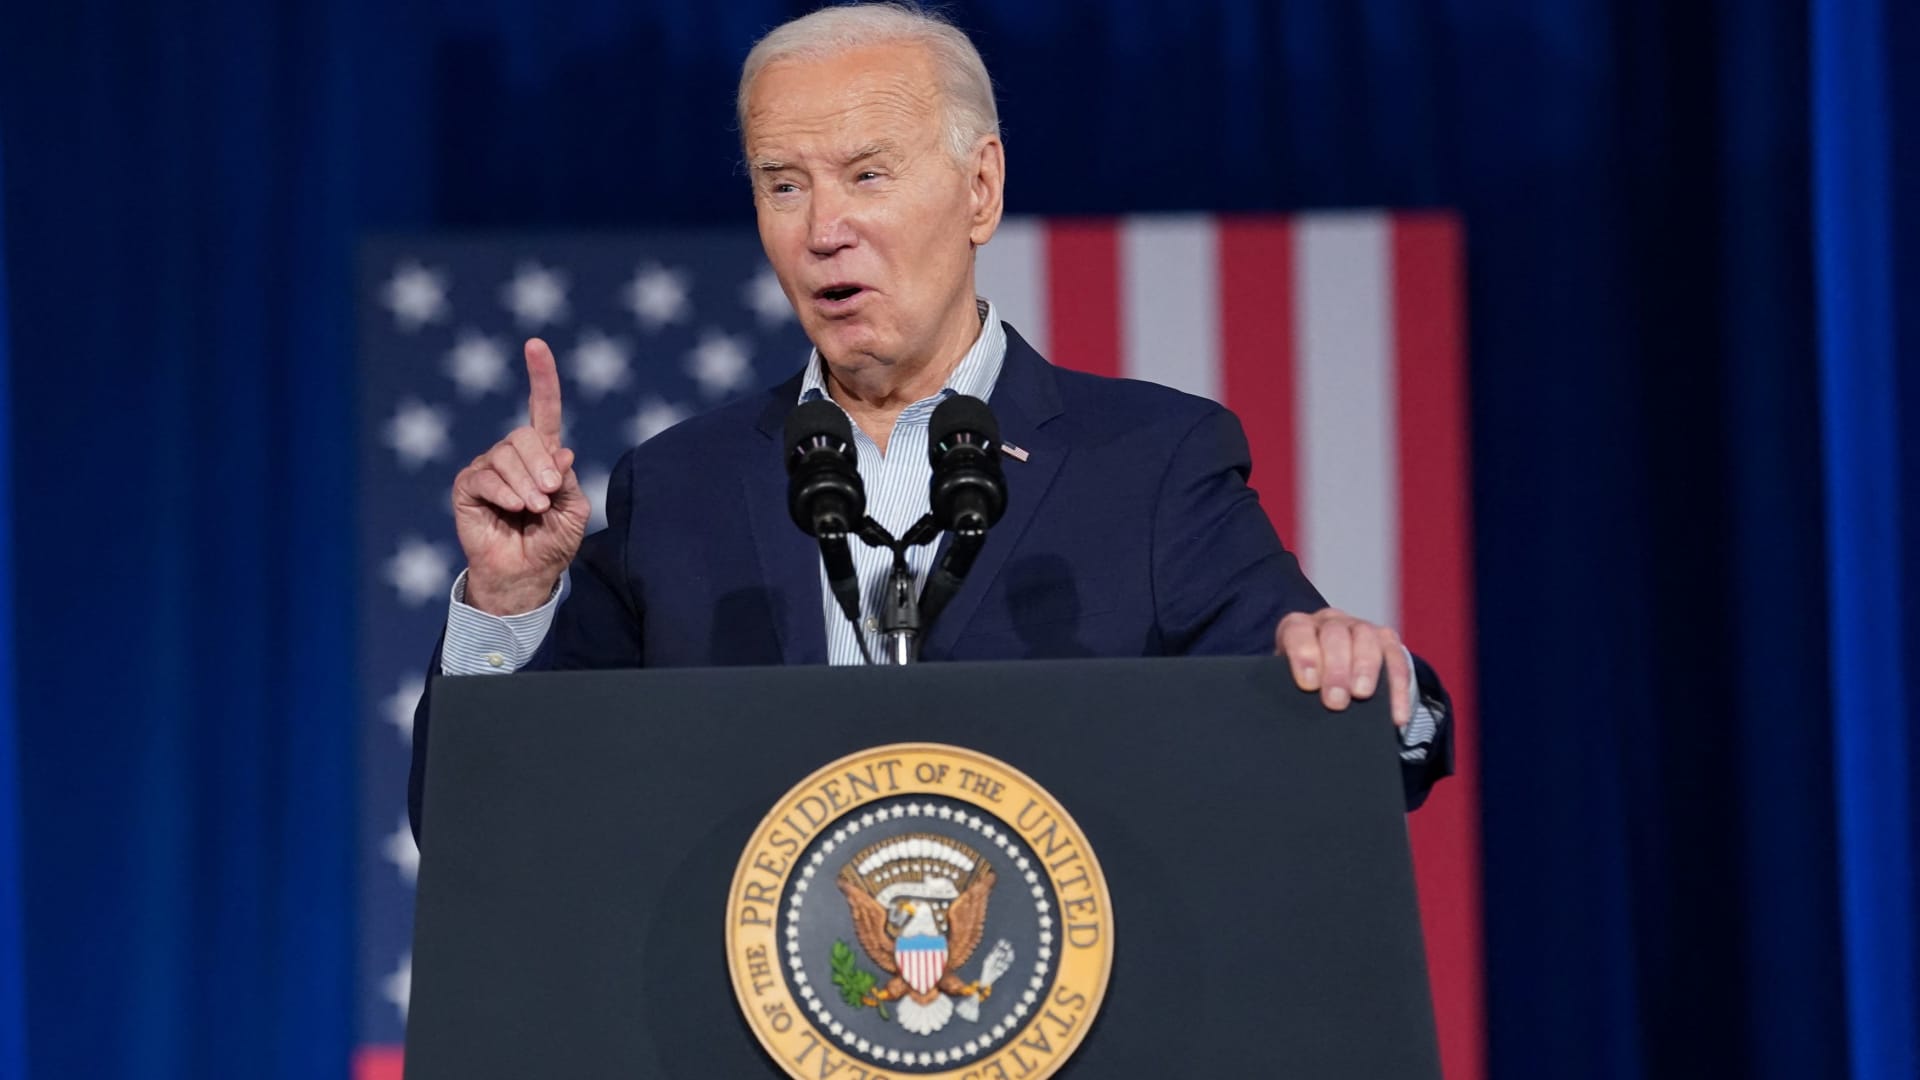 Biden blames China, Japan and India’s financial woes on ‘xenophobia’